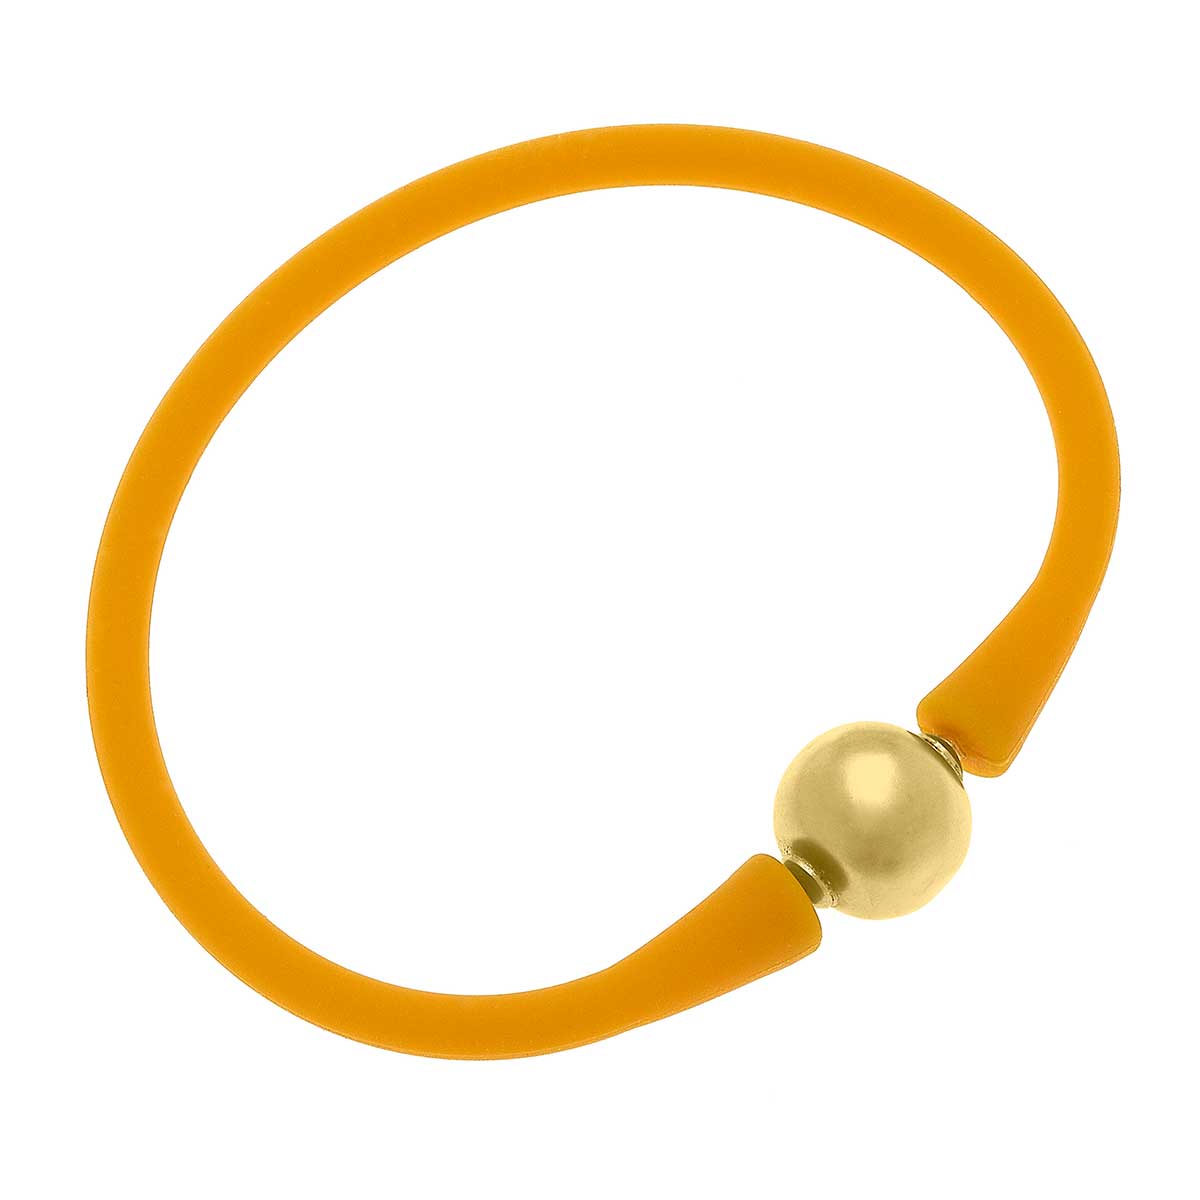 Bali 24K Gold Plated Ball Bead Silicone Bracelet in Cantaloupe